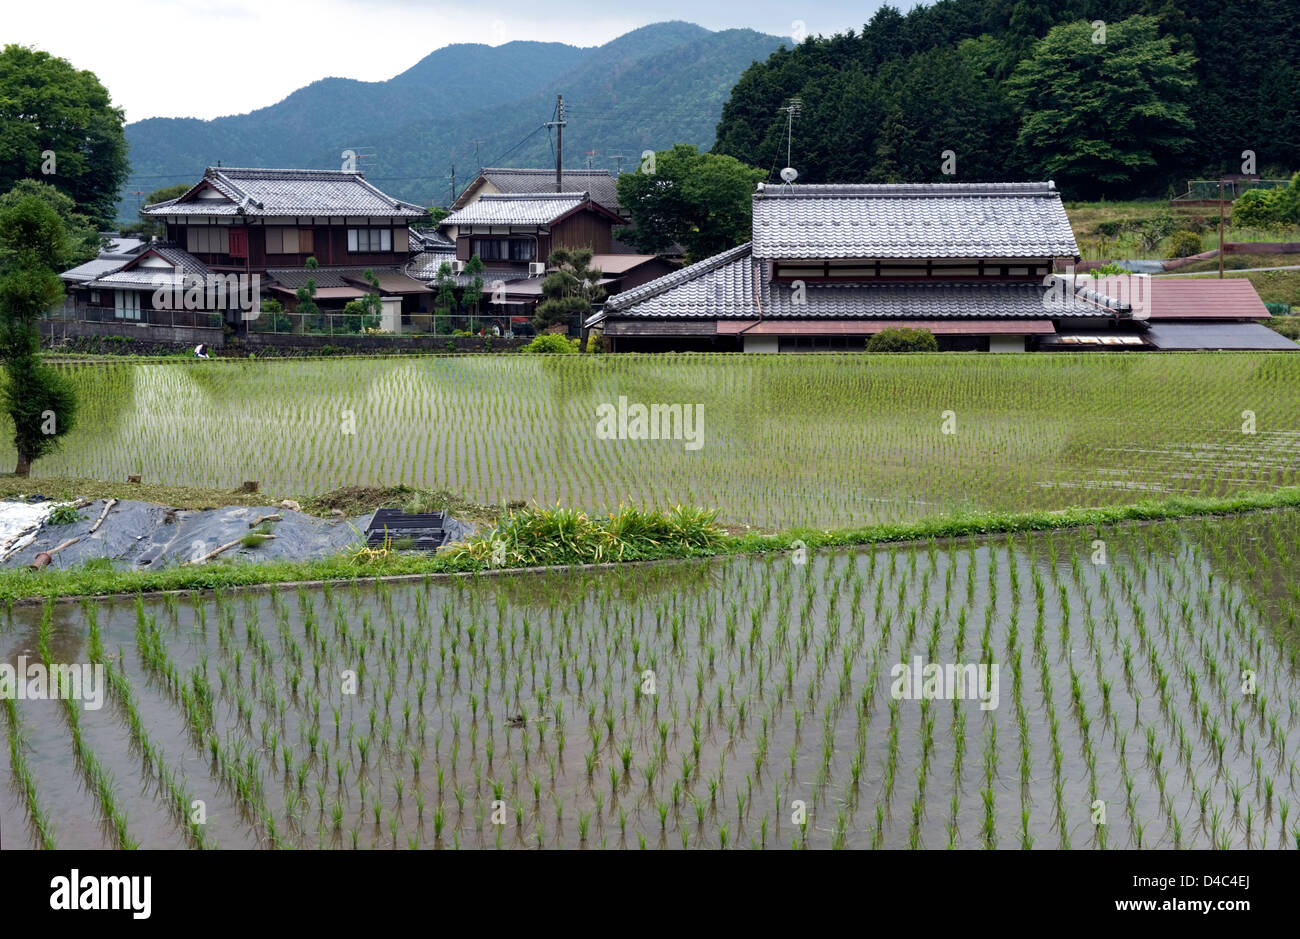 Flooded spring rice paddy with planted seedlings and farm houses clustered together in the rural countryside village of Ohara Stock Photo